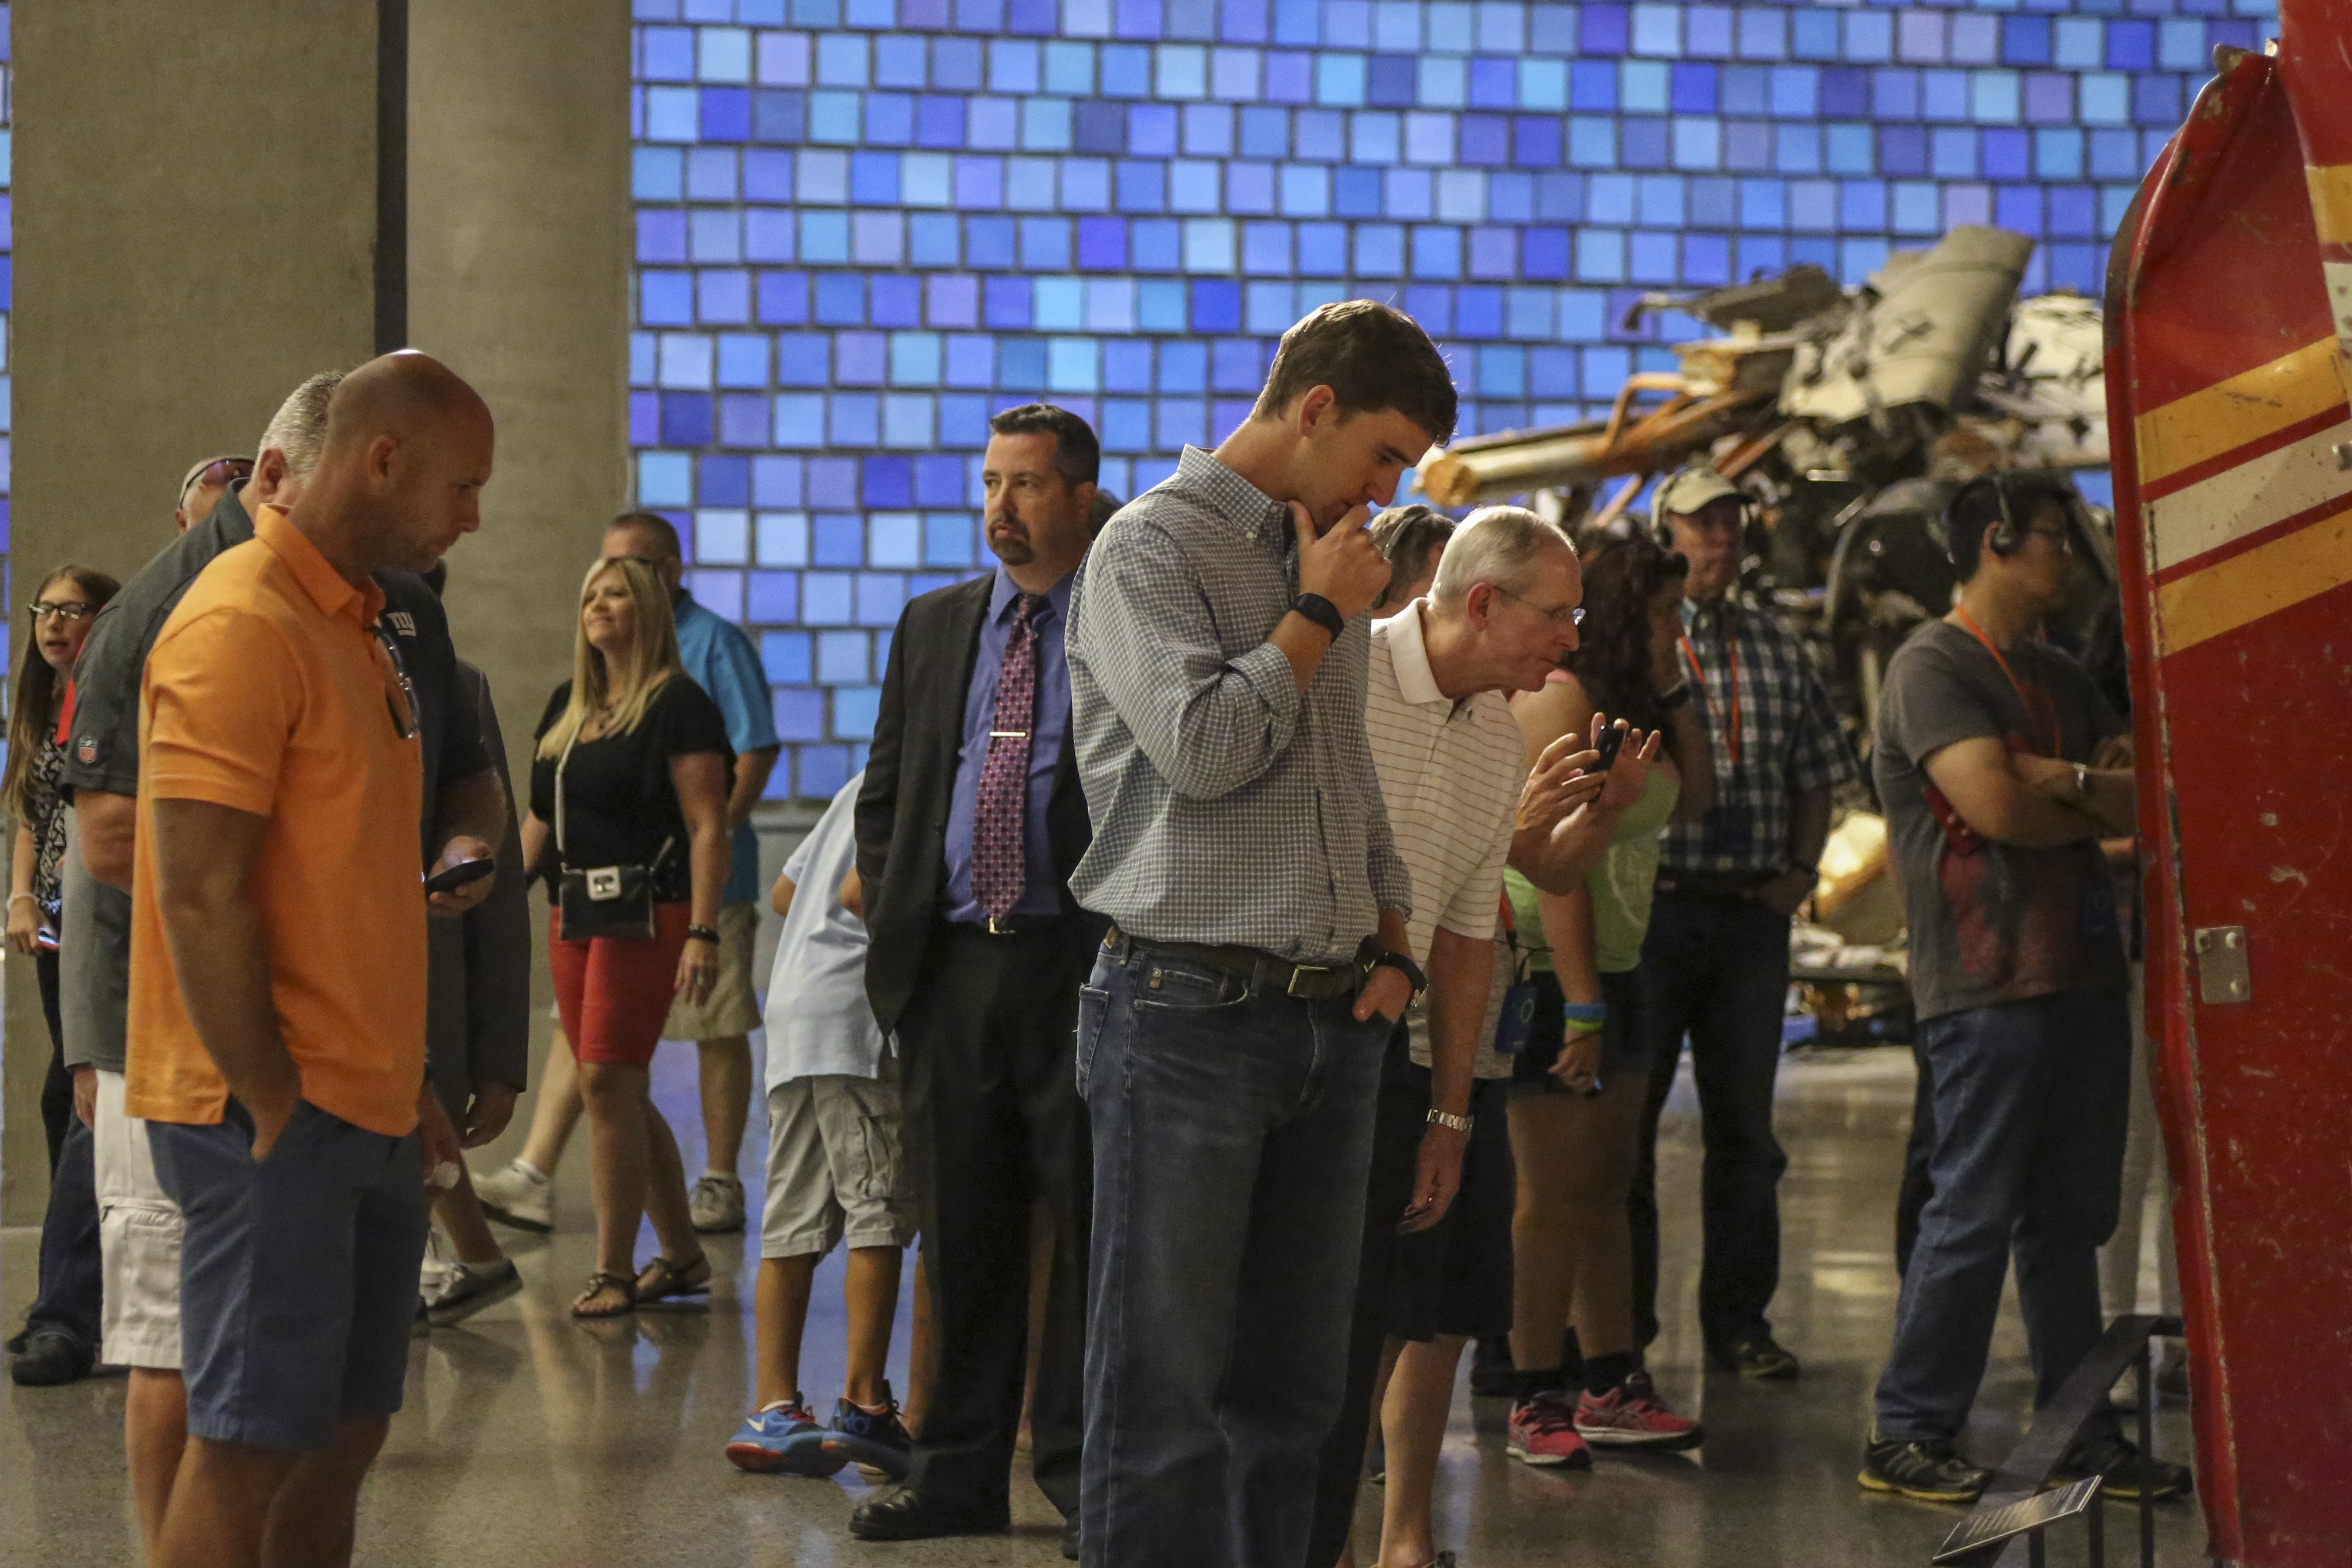 Eli Manning and New York Giants coach Tom Coughlin observe Ladder 3 at the Museum. A crowd of other visitors are in the background.